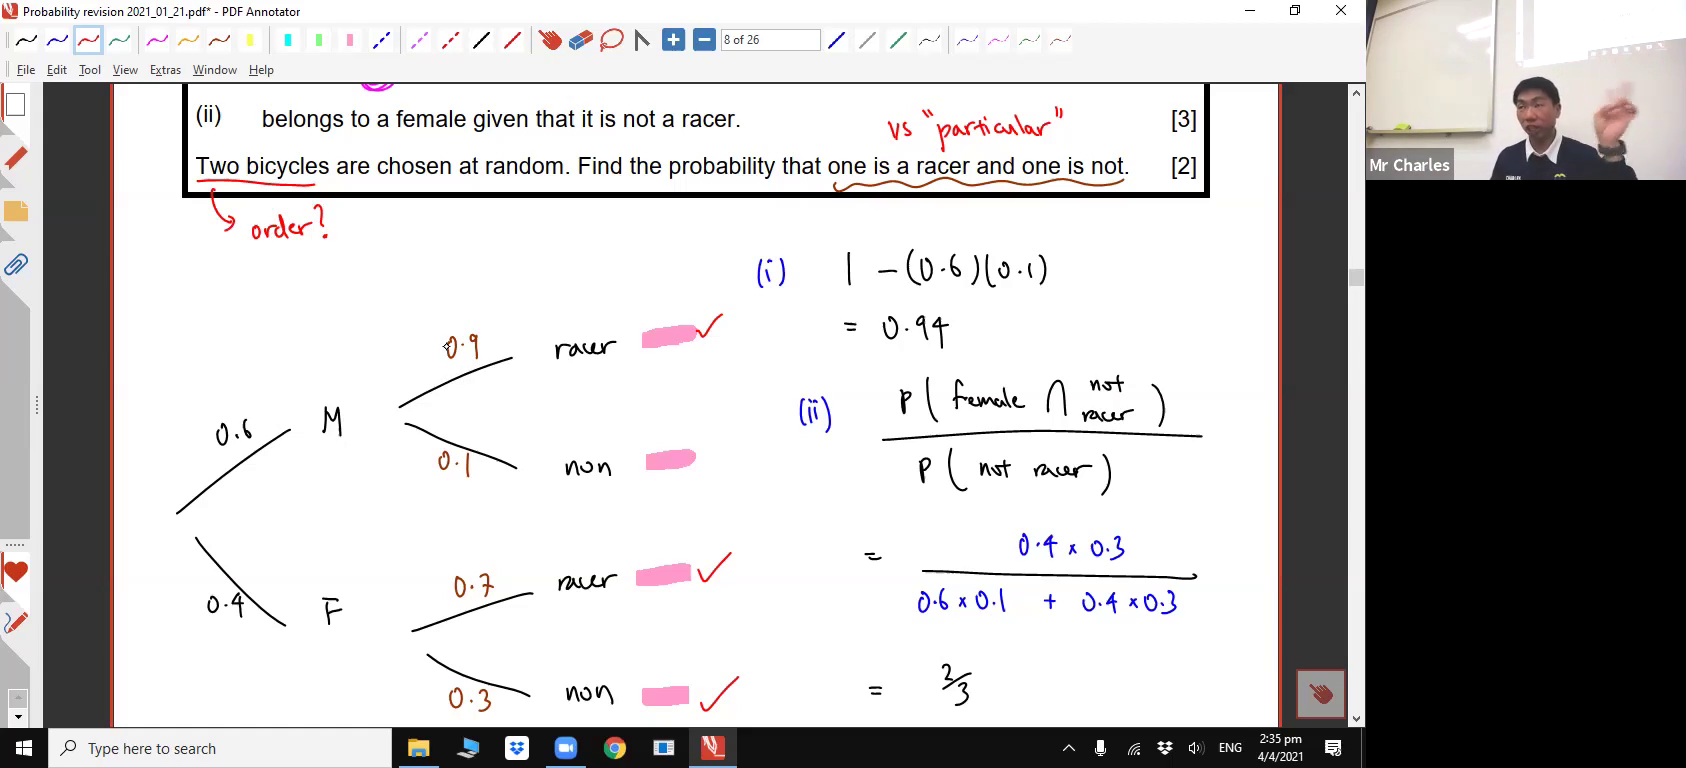 [PROBABILITY REVISION] Conditional Probability